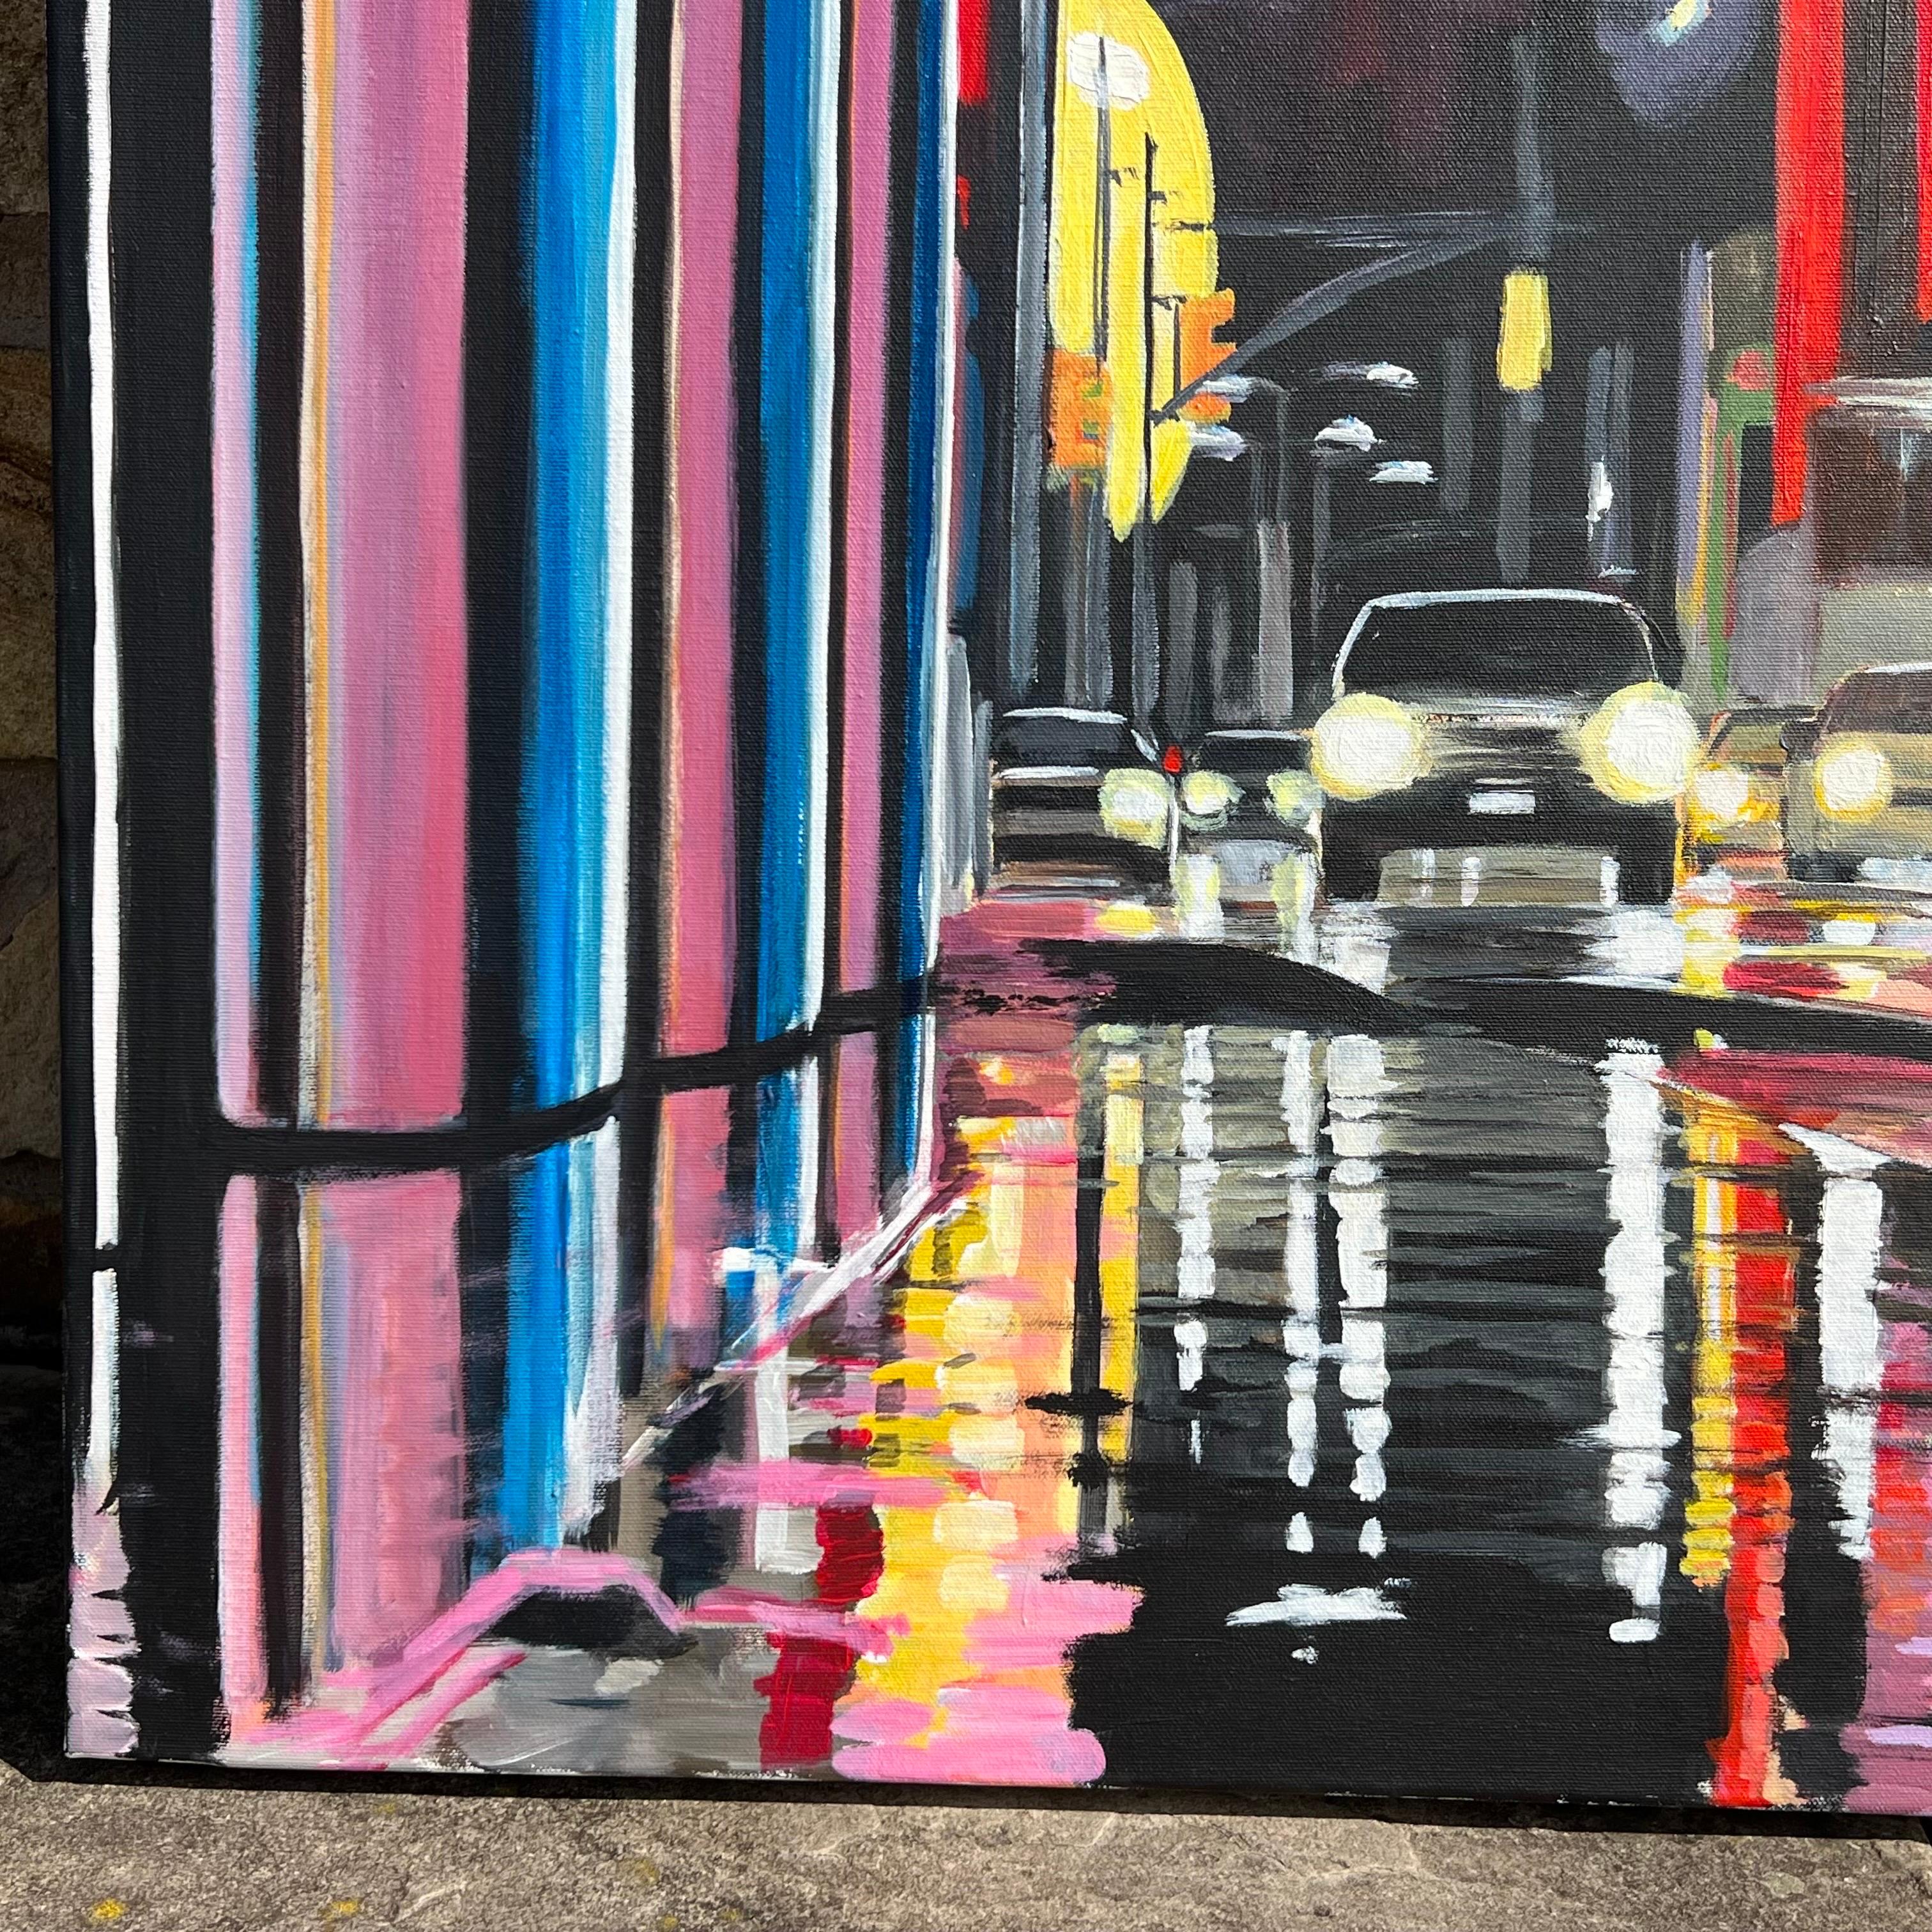 Original Painting of a Contemporary Broadway New York City Street Scene after the Rain by British Urban Landscape Artist, Angela Wakefield. This is a major work to continue her epic New York Series which now spans over a decade. 

Art measures 36 x